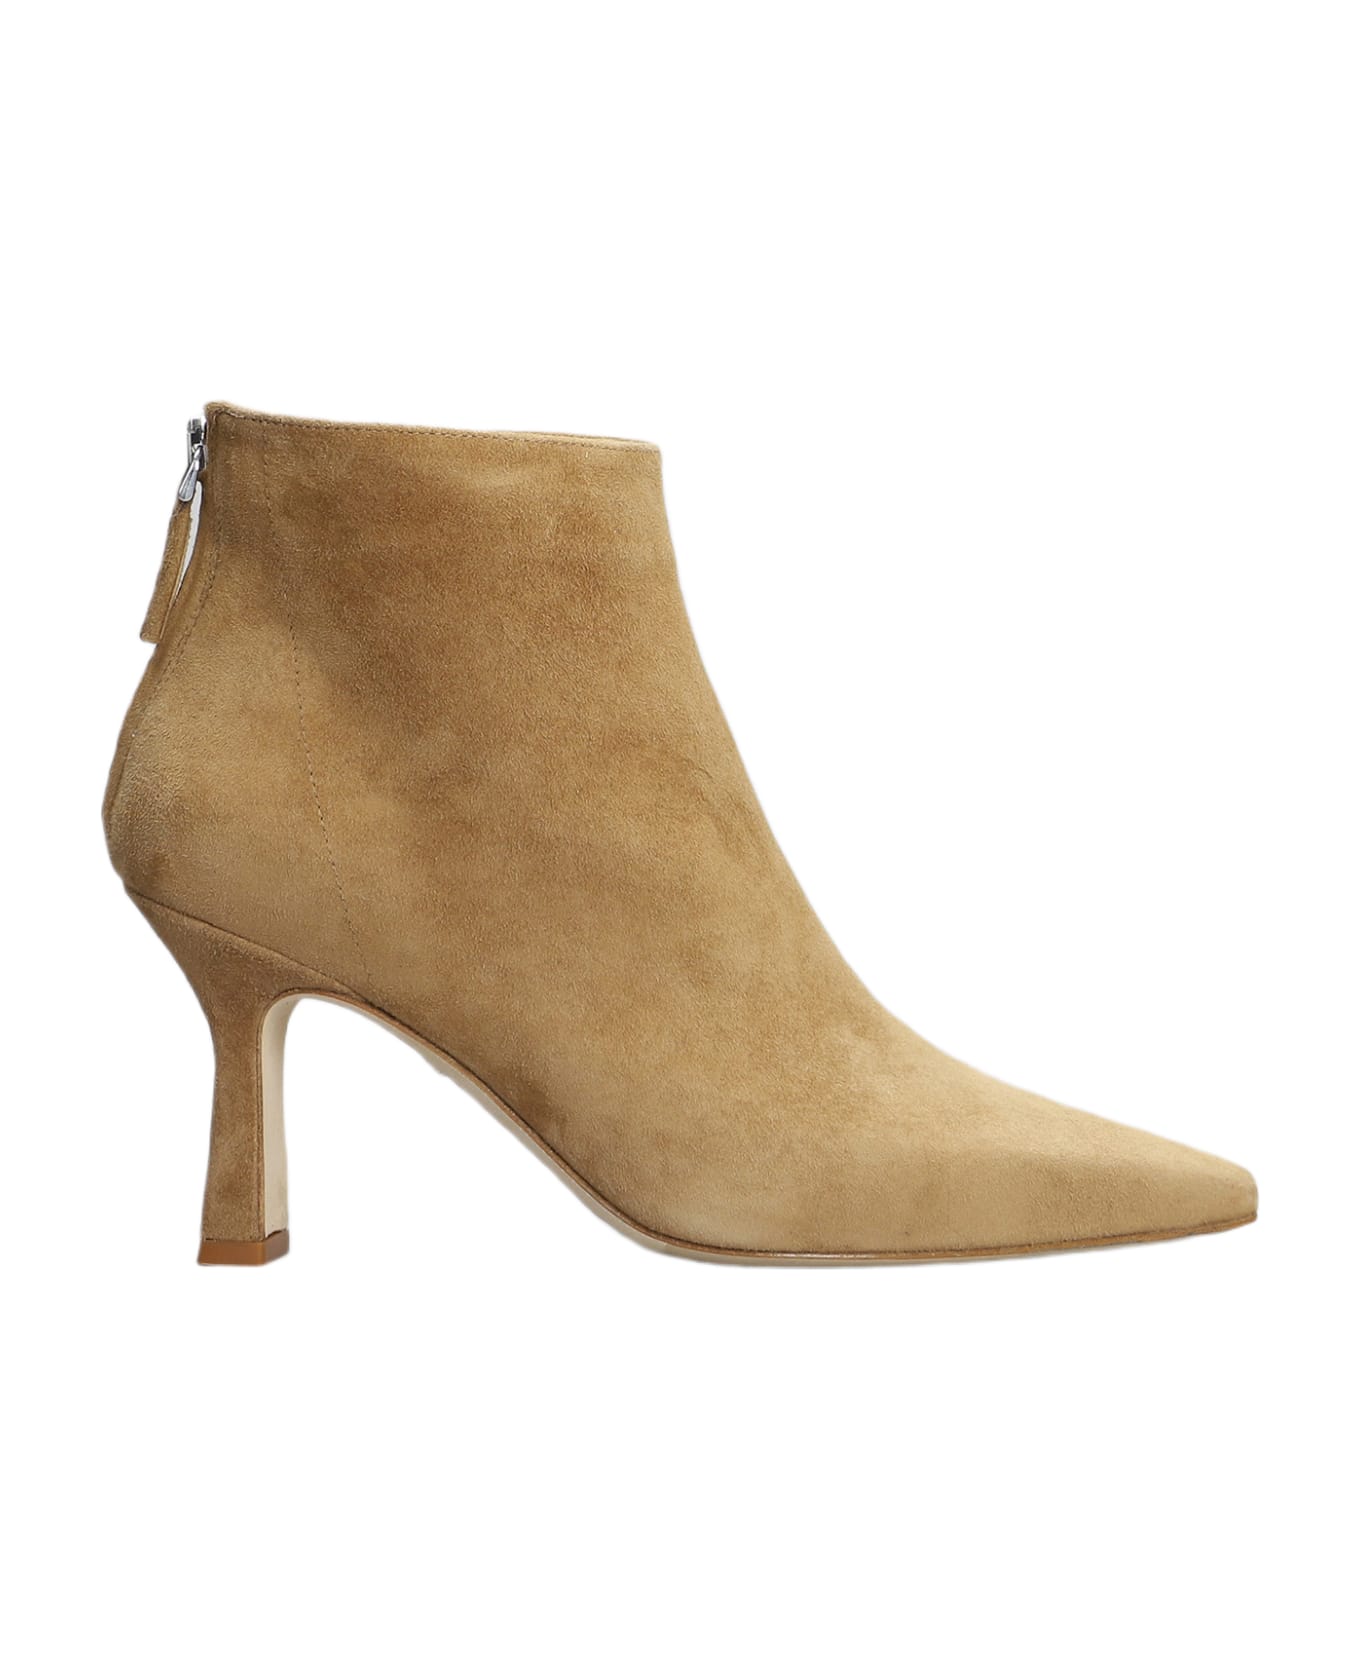 The Seller High Heels Ankle Boots In Leather Color Suede - leather color ブーツ